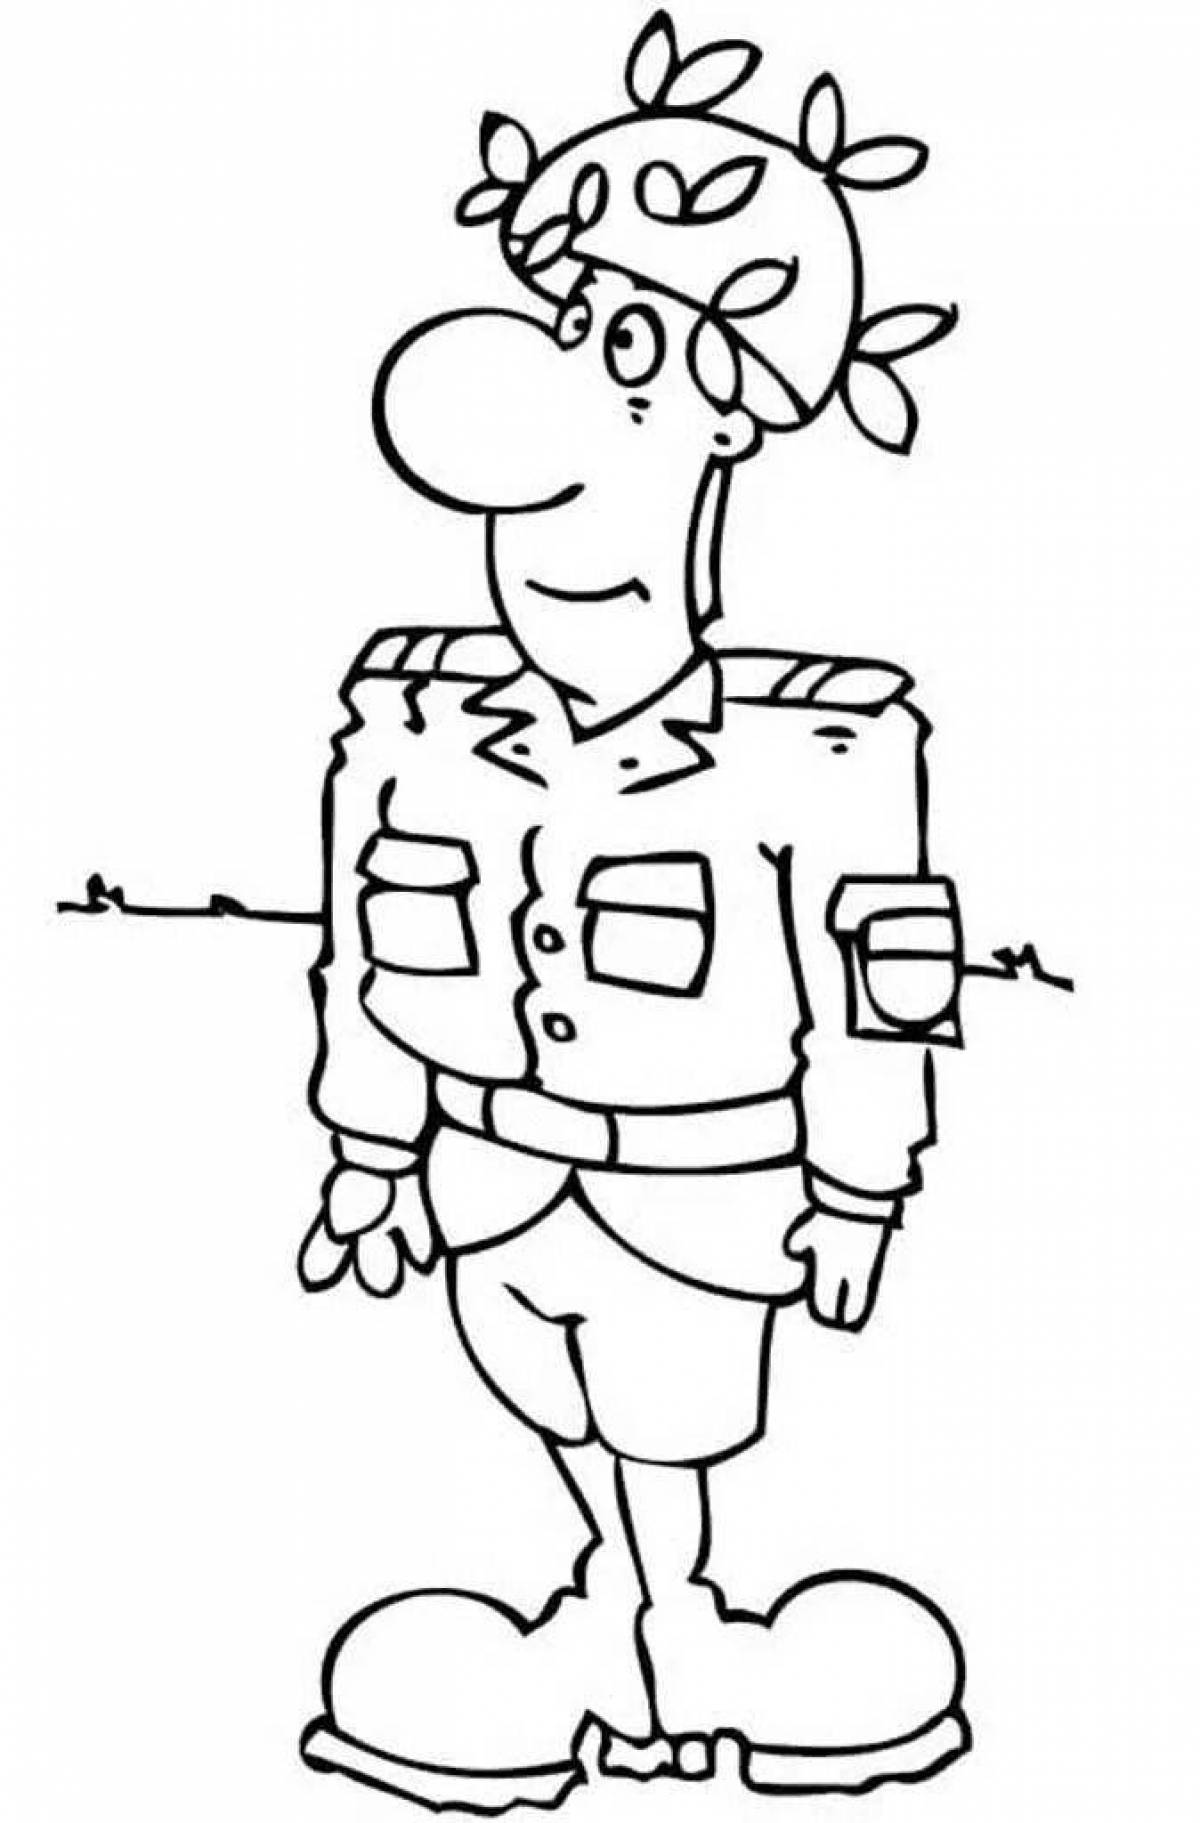 Charming soldier coloring book for kids